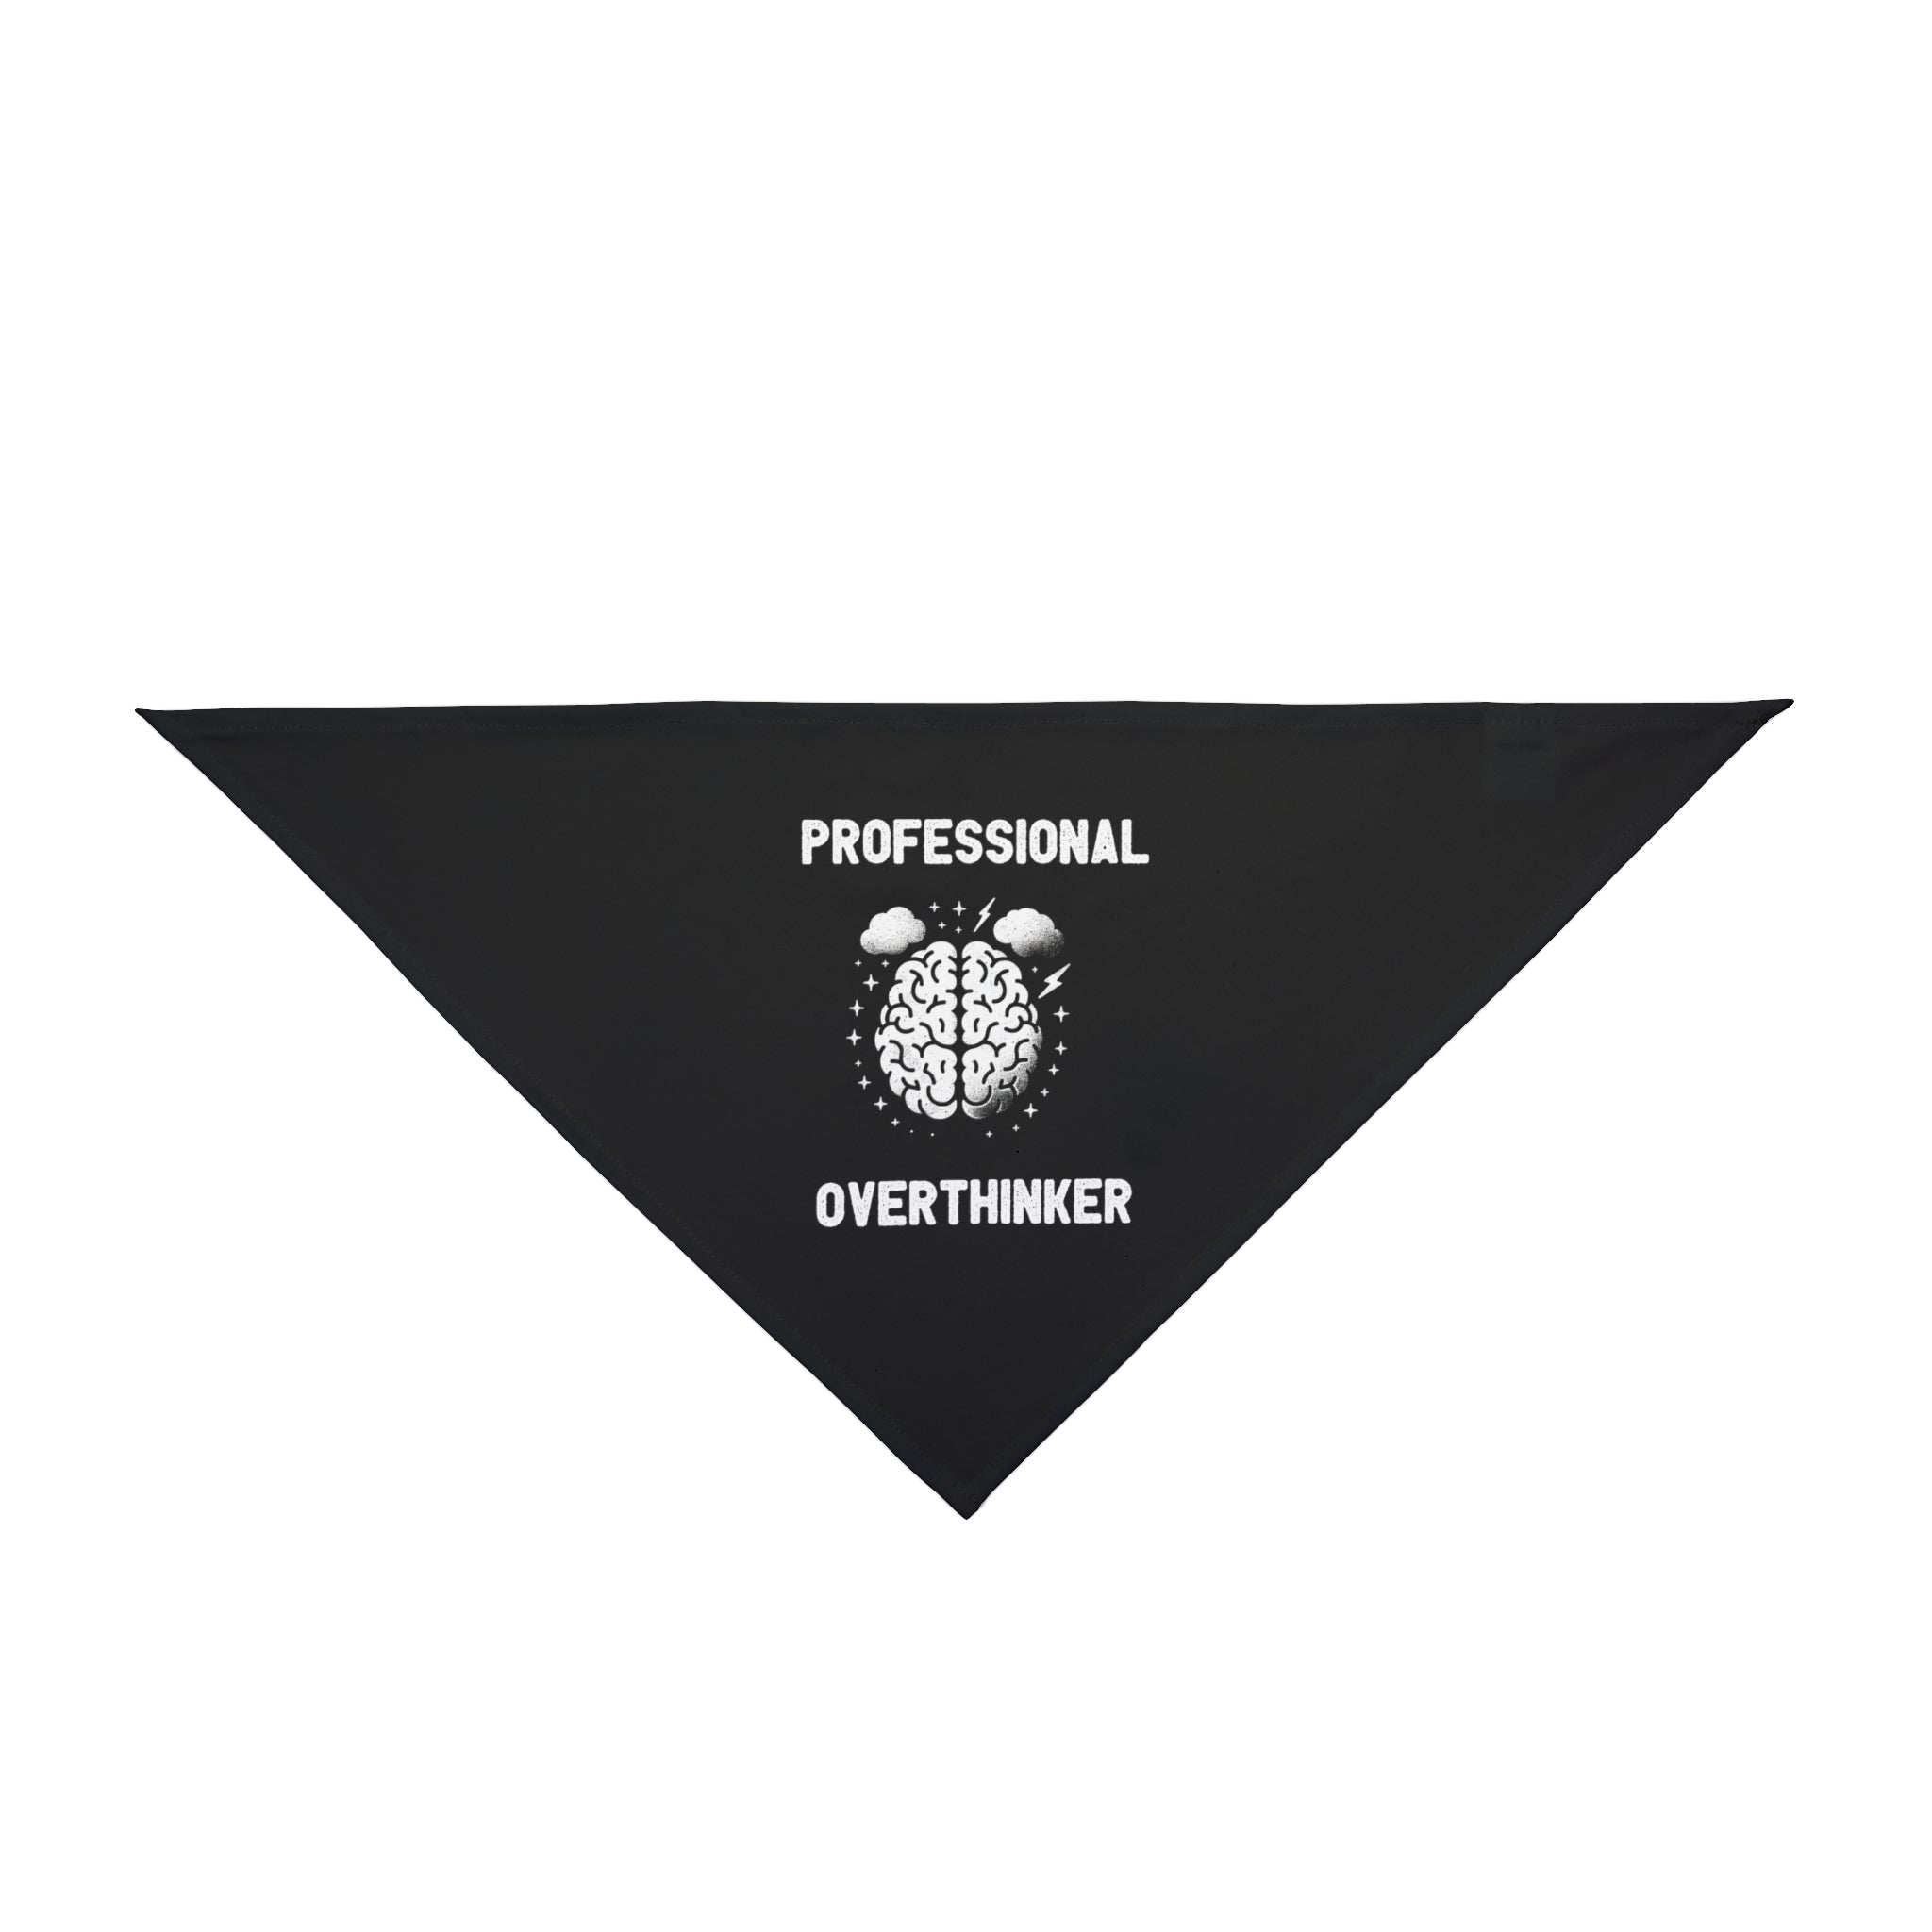 A black triangular bandana made of soft-spun polyester, emblazoned with the text "PROFESSIONAL OVERTHINKER" and an illustration of a brain in the center, perfect for your conscious pet, aka the Professional Overthinker - Pet Bandana.